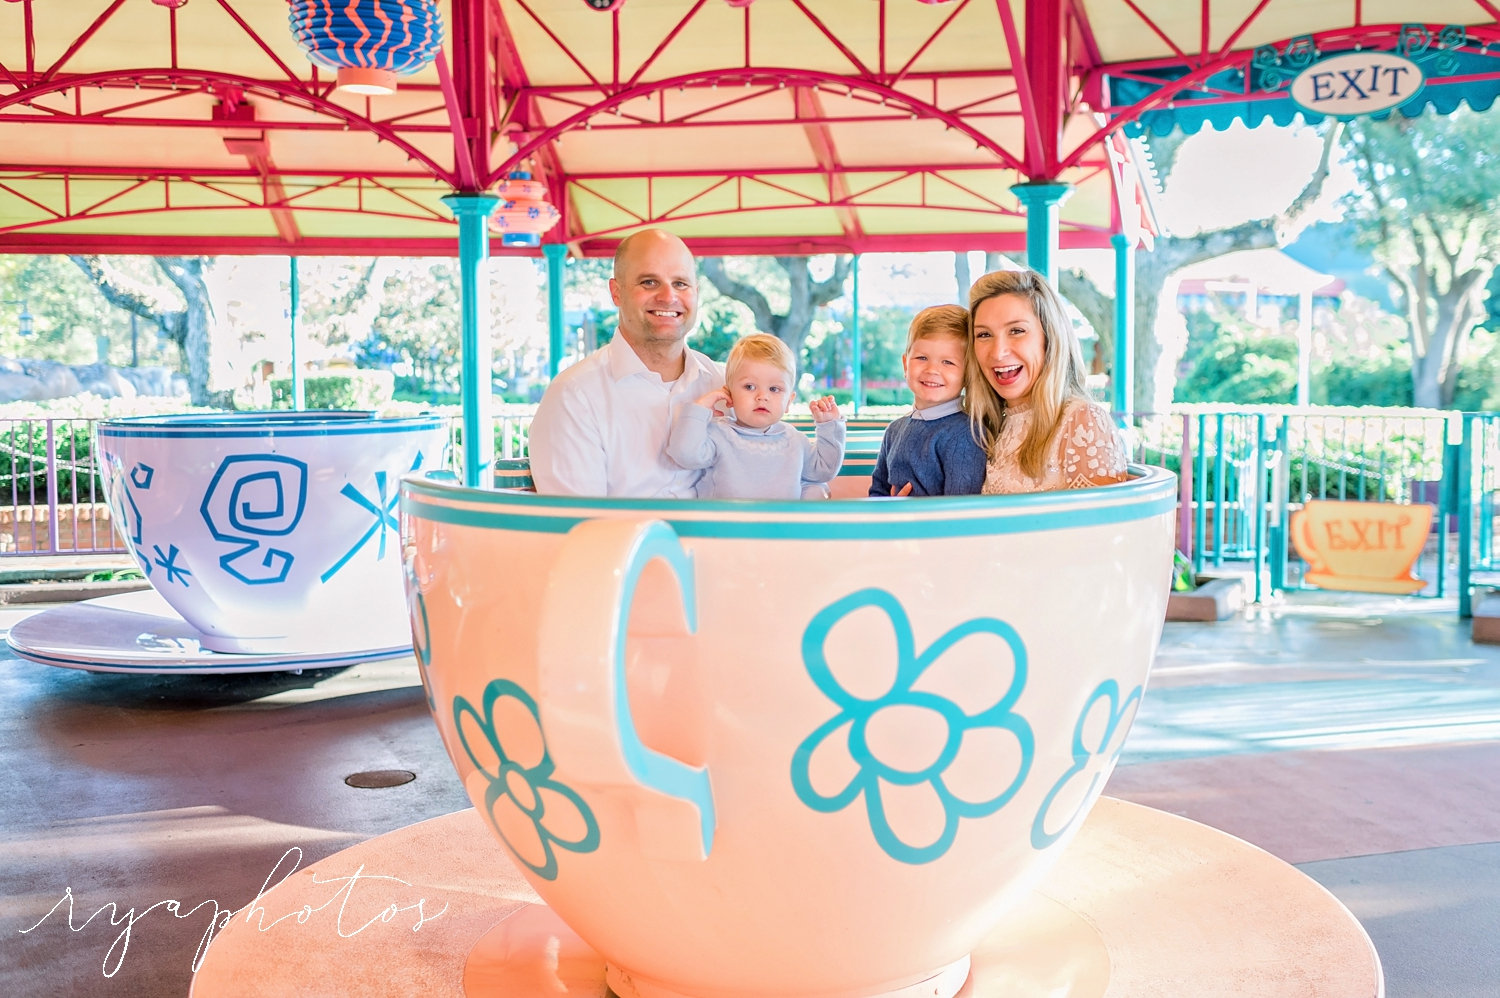 teacups, Disney World, Orlando, video, Mad Tea Party, spinning teacup ride, Magic Session